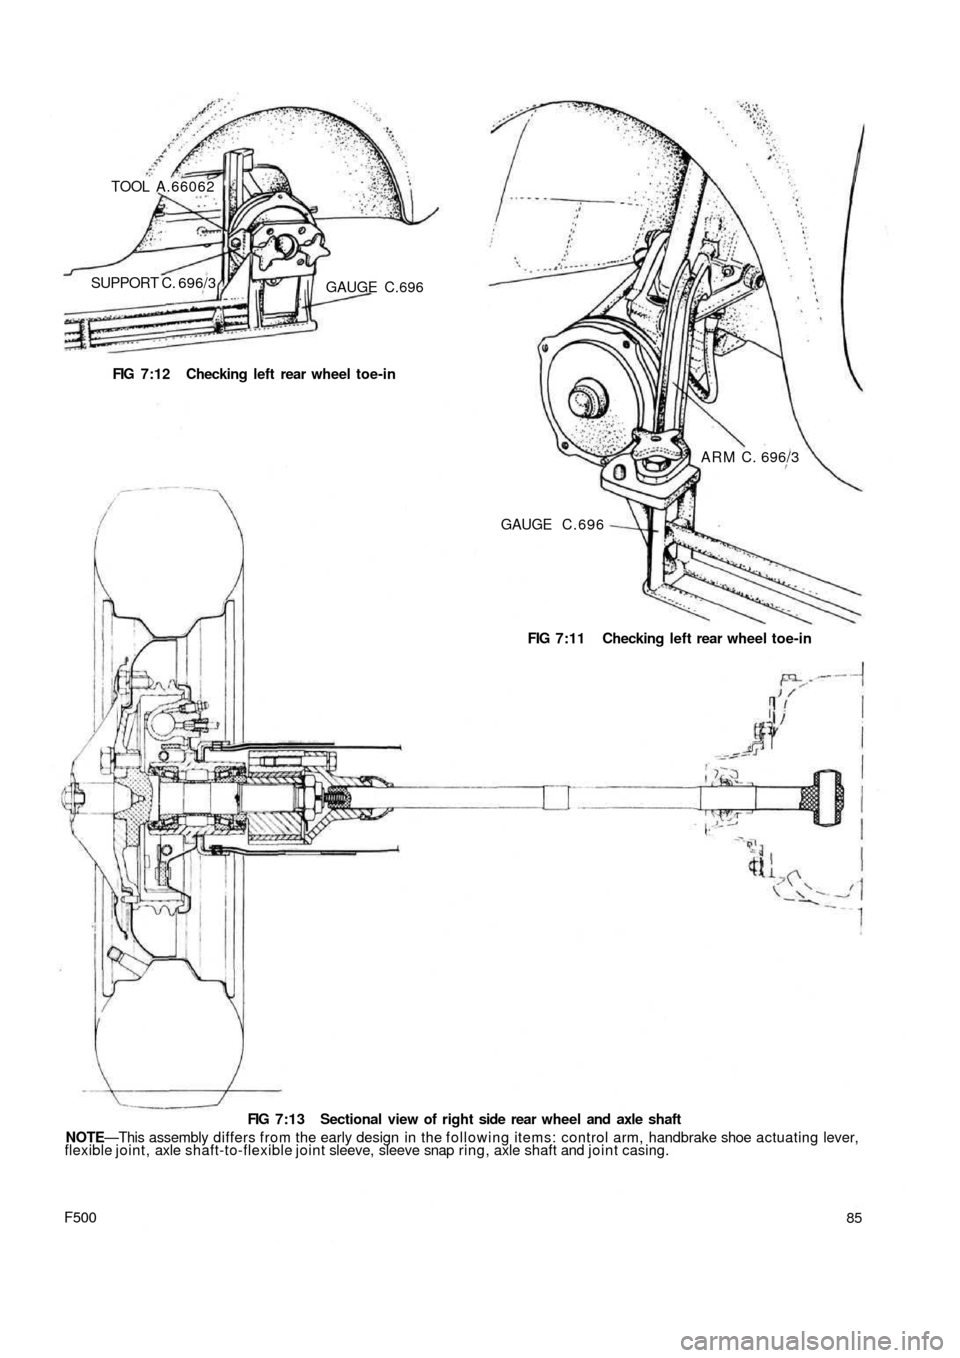 FIAT 500 1961 1.G Workshop Manual TOOL A.66062
SUPPORT C. 696/3GAUGE C.696
FIG 7:12 Checking left rear wheel toe-in
ARM C. 696/3
GAUGE C . 6 9 6
FIG 7:11 Checking left rear wheel toe-in
F500
FIG 7:13 Sectional view of right side rear 